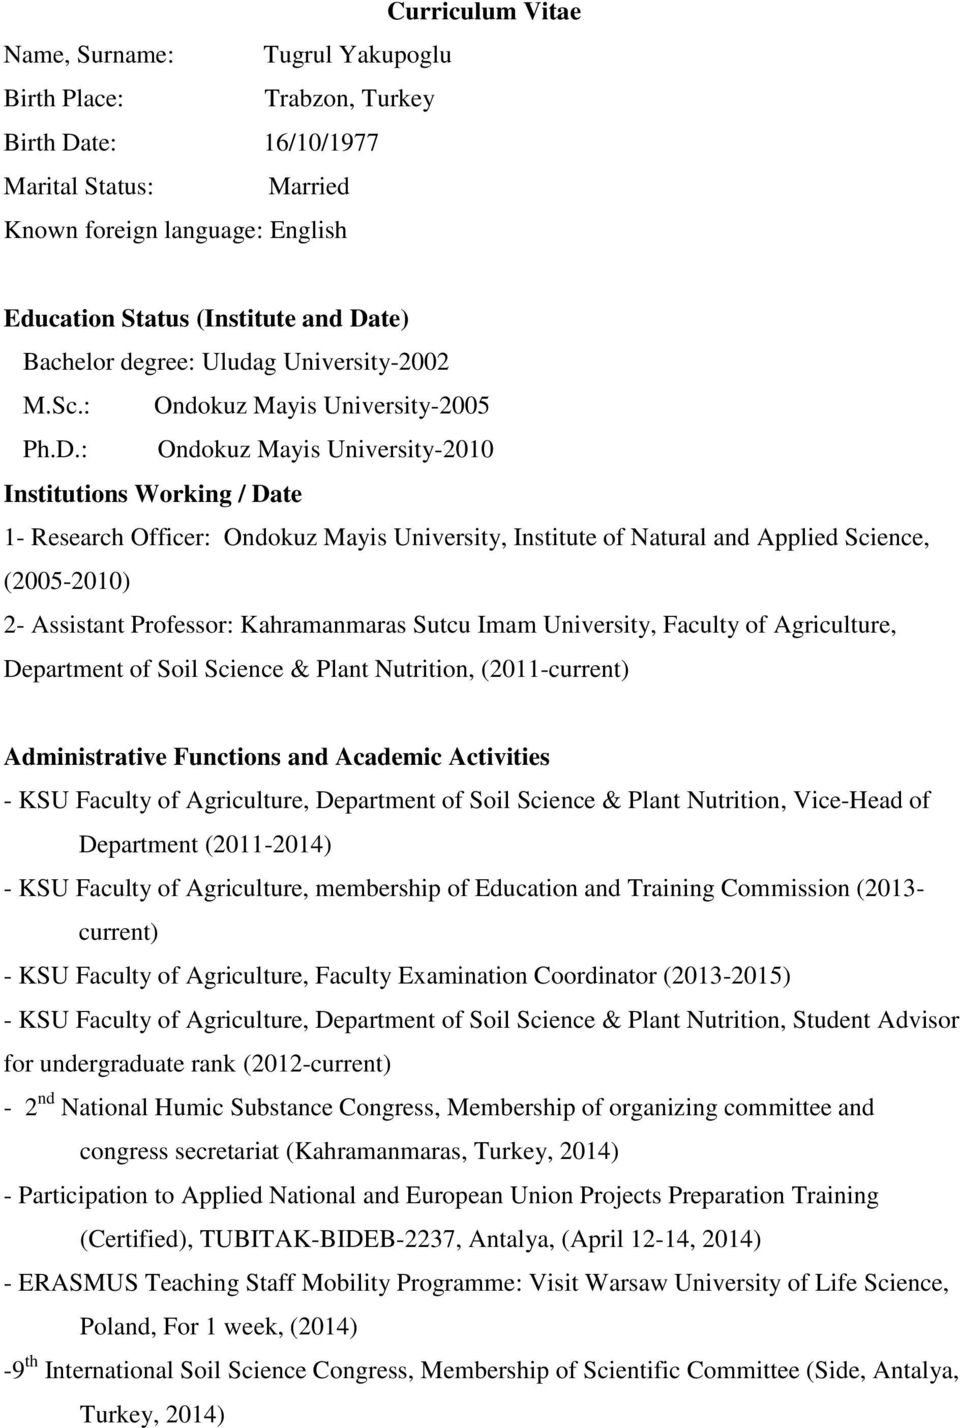 : Ondokuz Mayis University-2010 Institutions Working / Date 1- Research Officer: Ondokuz Mayis University, Institute of Natural and Applied Science, (2005-2010) 2- Assistant Professor: Kahramanmaras